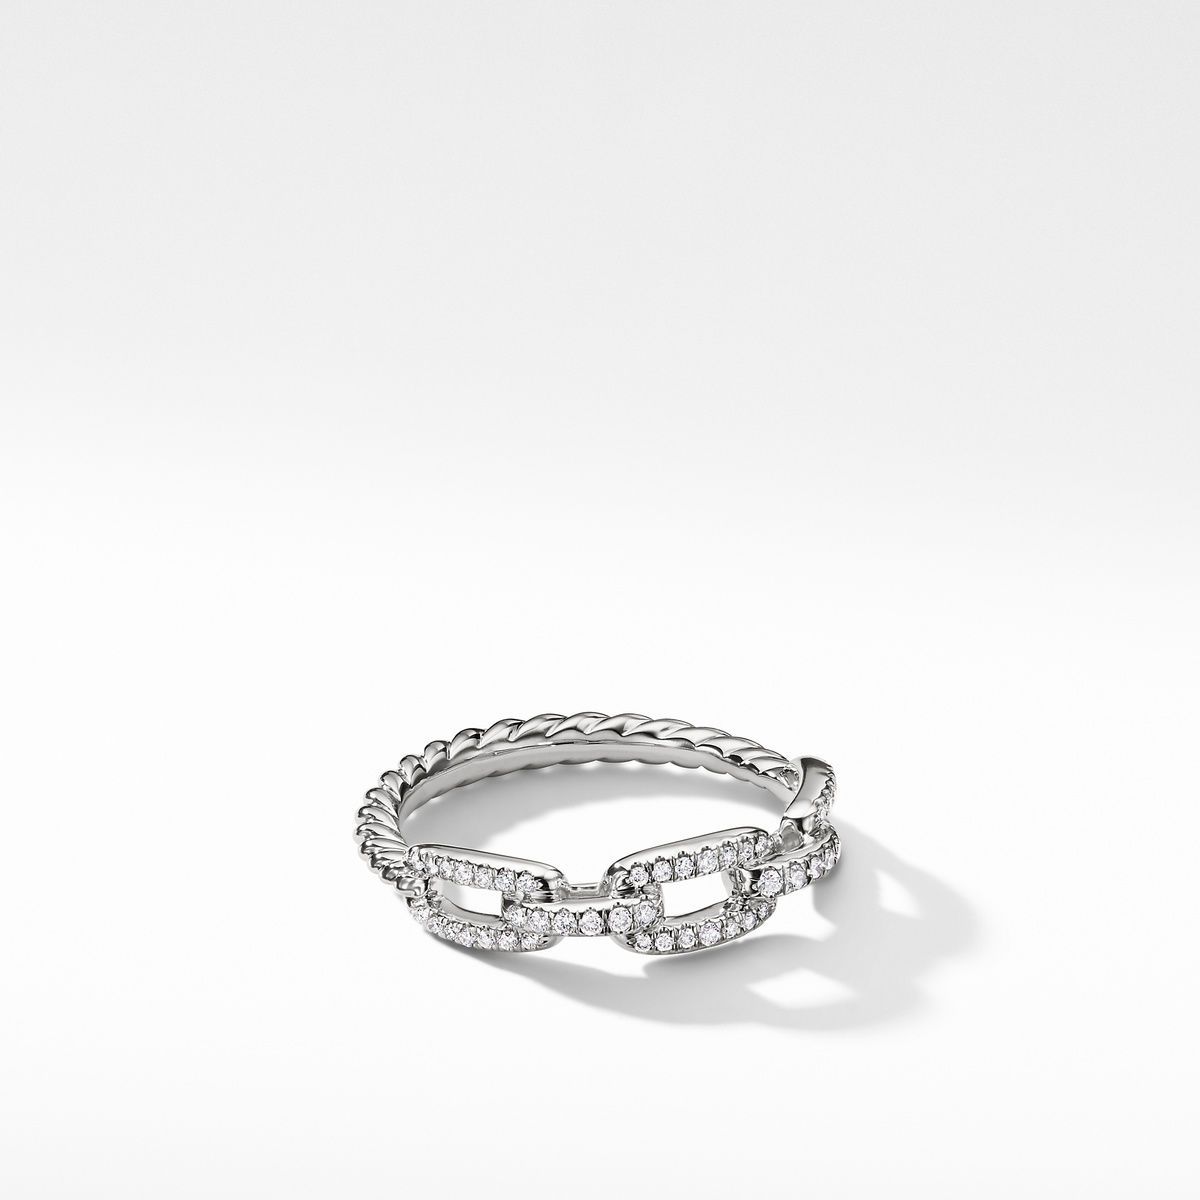 David Yurman Stax Single Row Pave Chain Link Ring with Diamonds in 18K White Gold, 4.5mm - Size 6.5